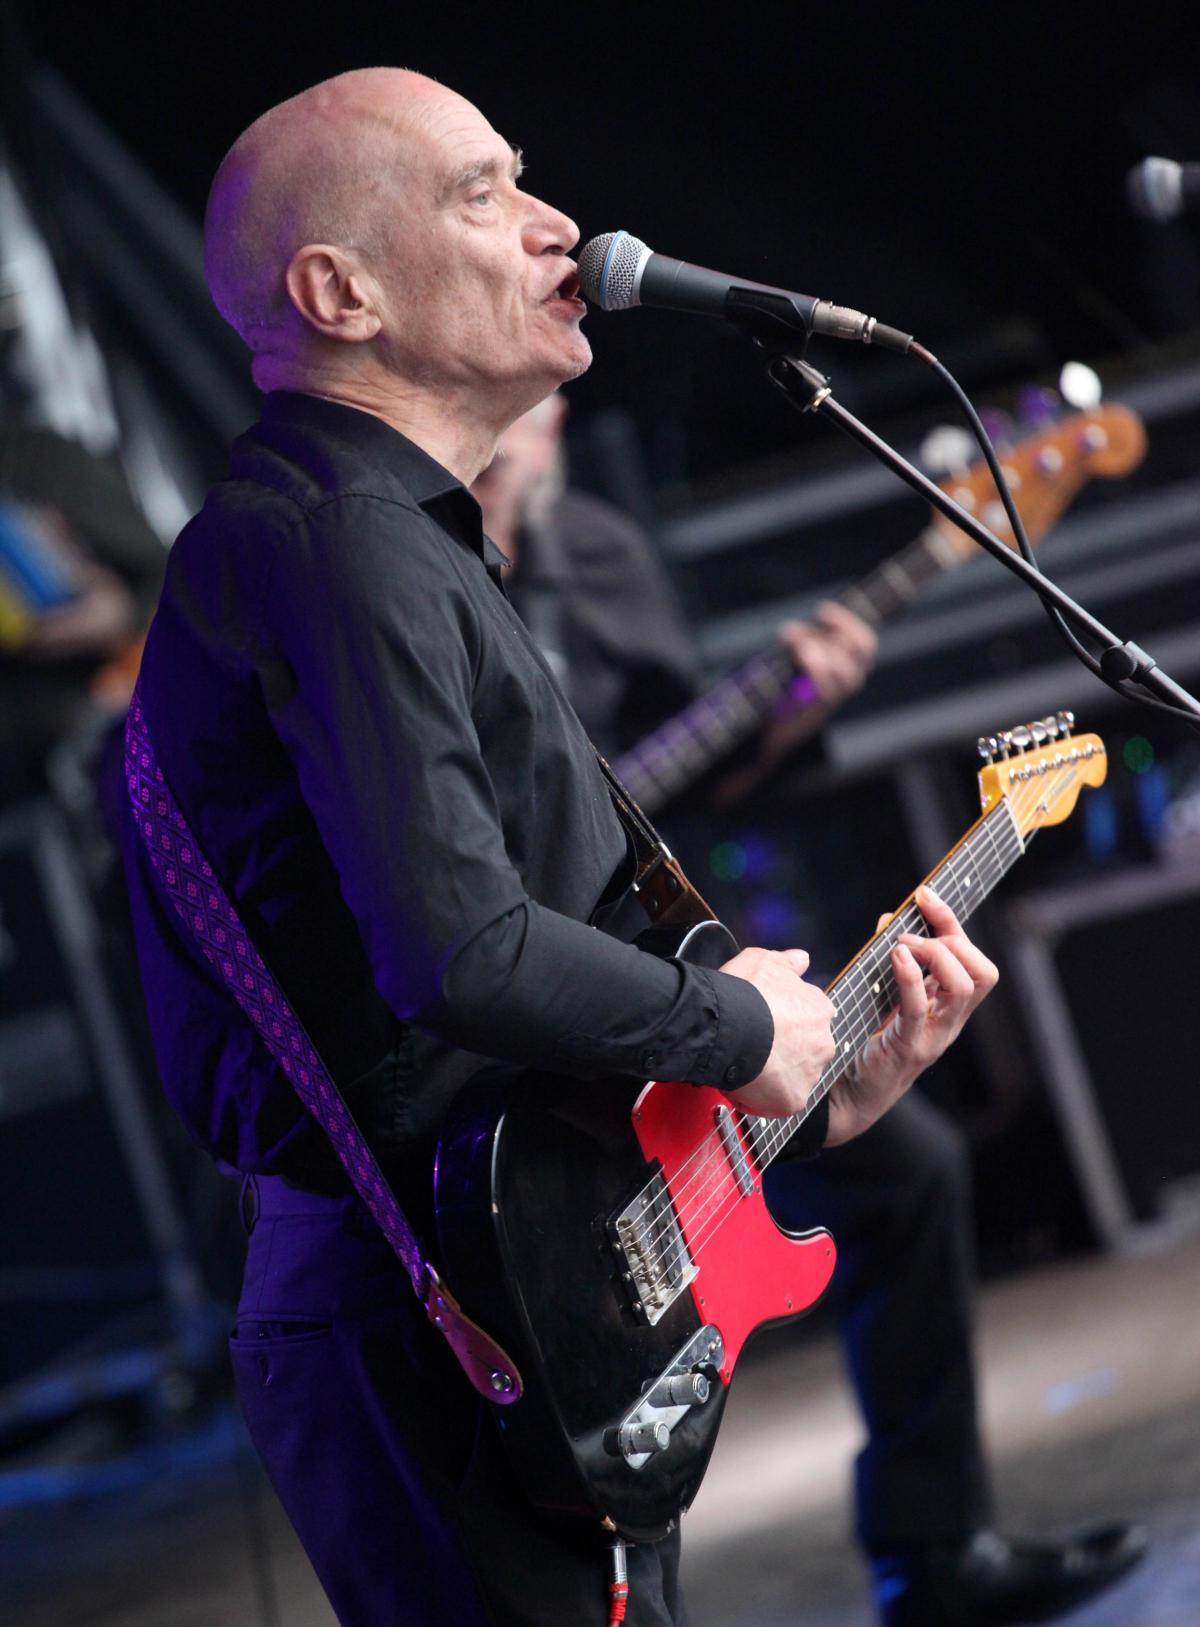 Wilko Johnson during Concert at the Kings in All Cannings. Picture by Vicky Scipio